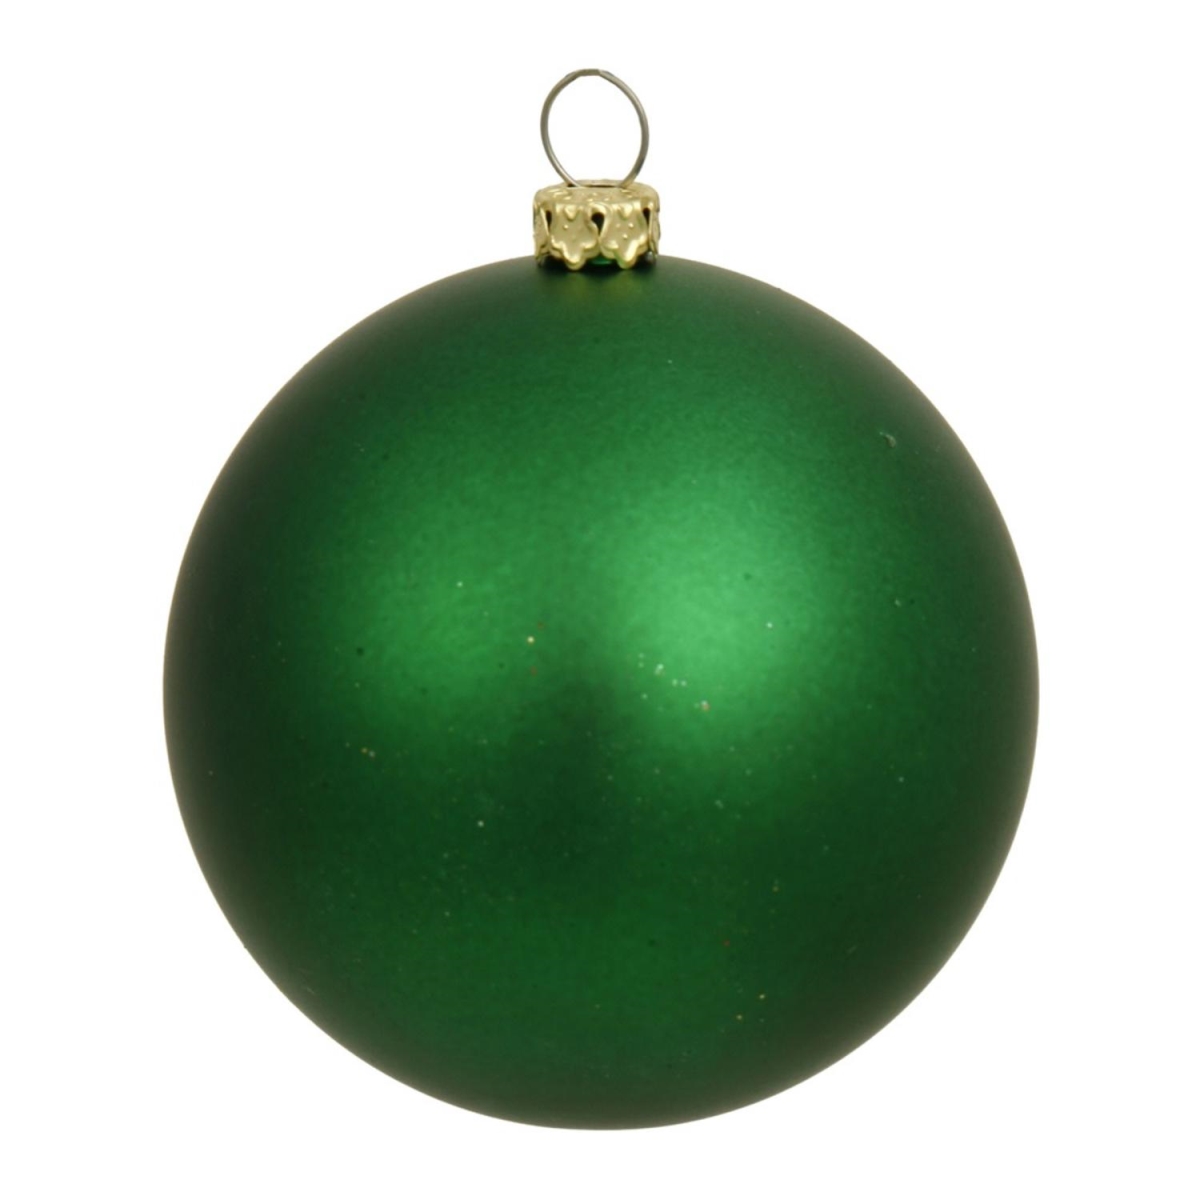 31750039 Matte Green Uv Resistant Commercial Drilled Shatterproof Christmas Ball Ornament - 2.75 In.